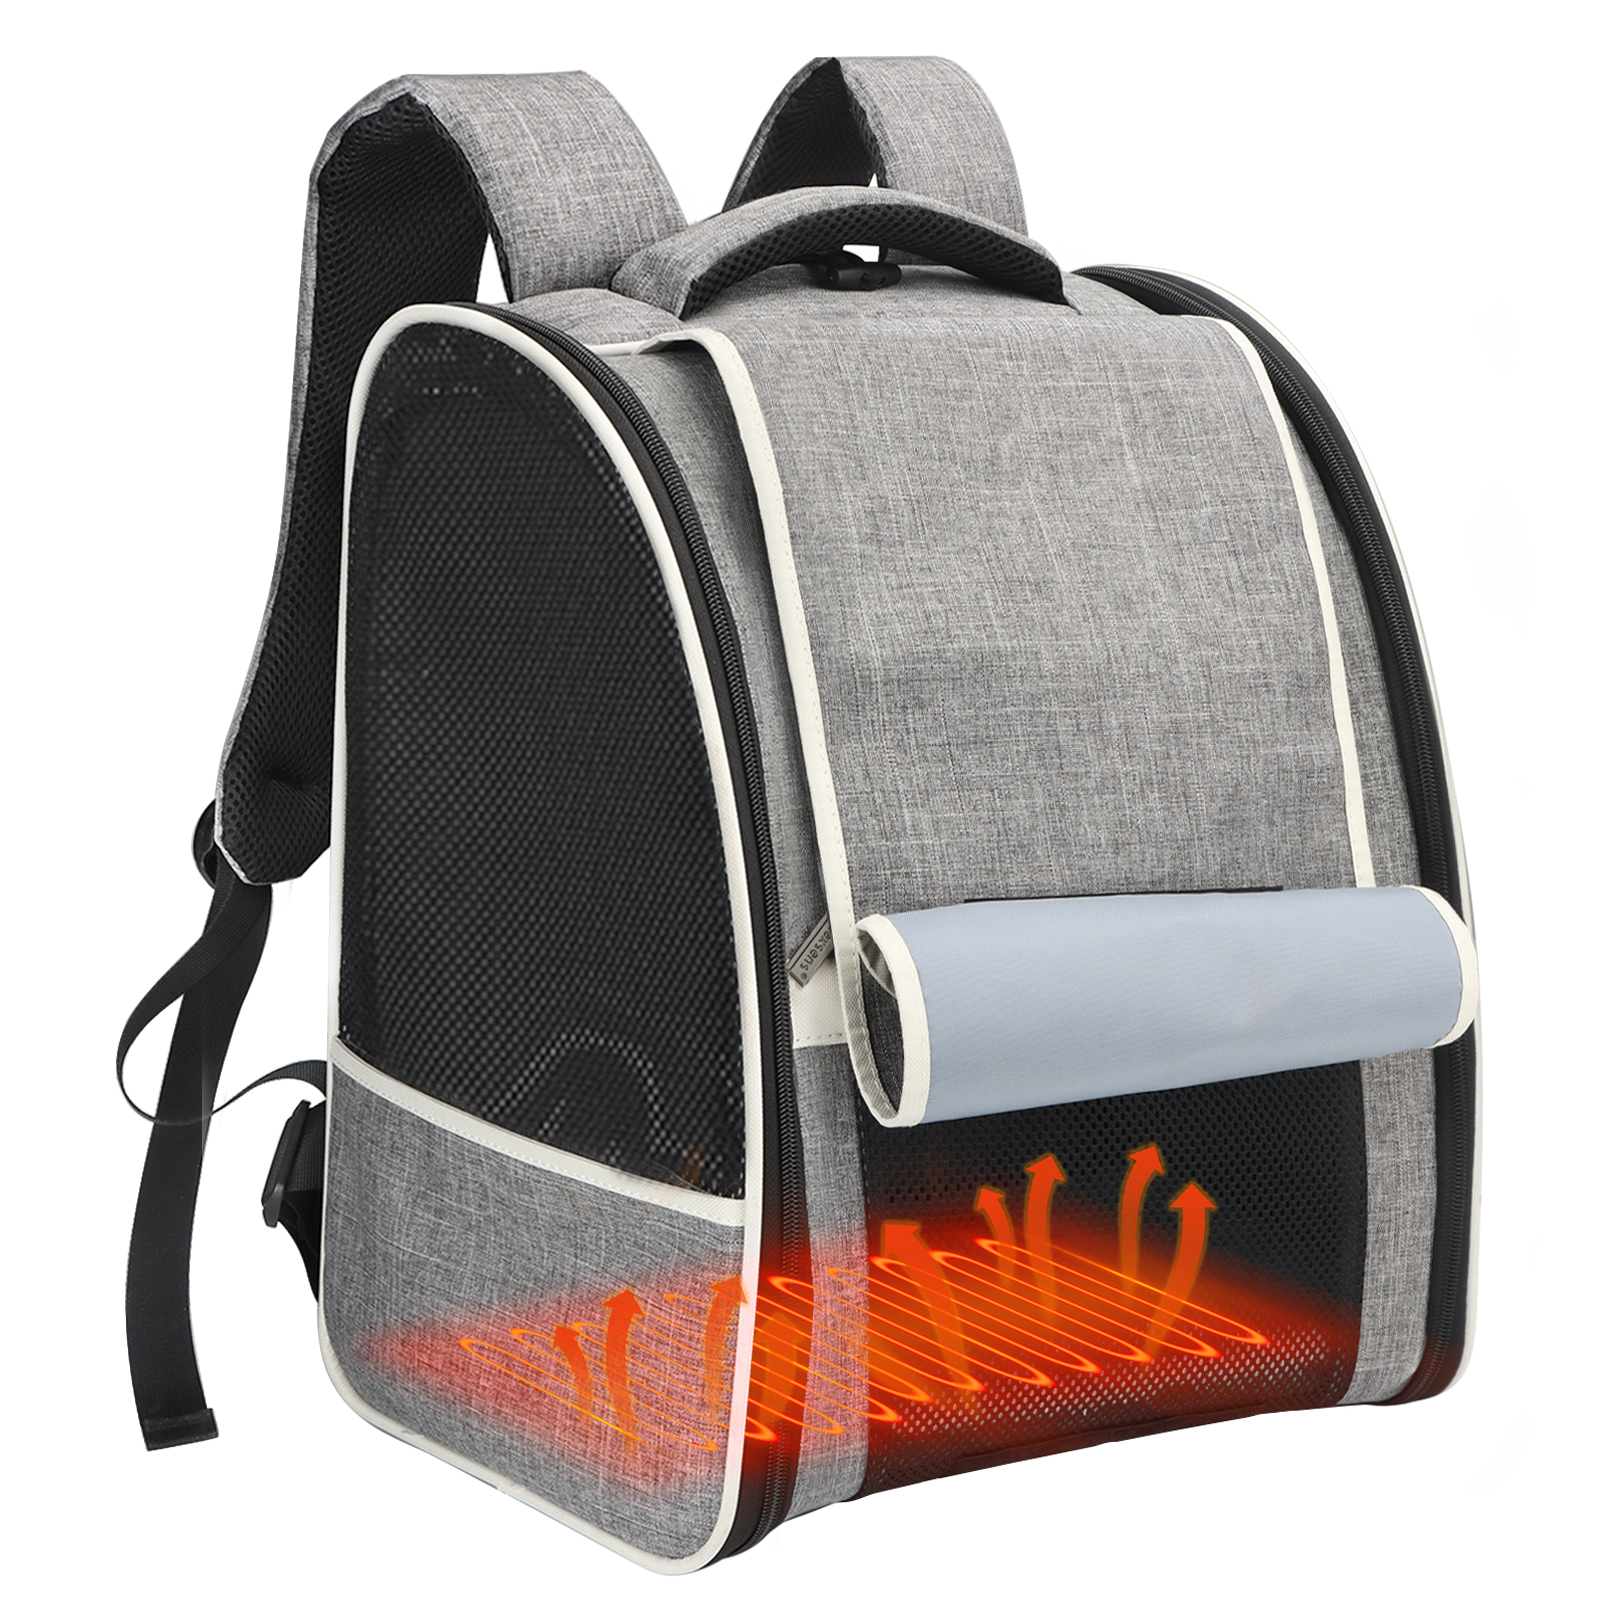 Pet Backpack with Heating Pad for Winter Travel Outdoors